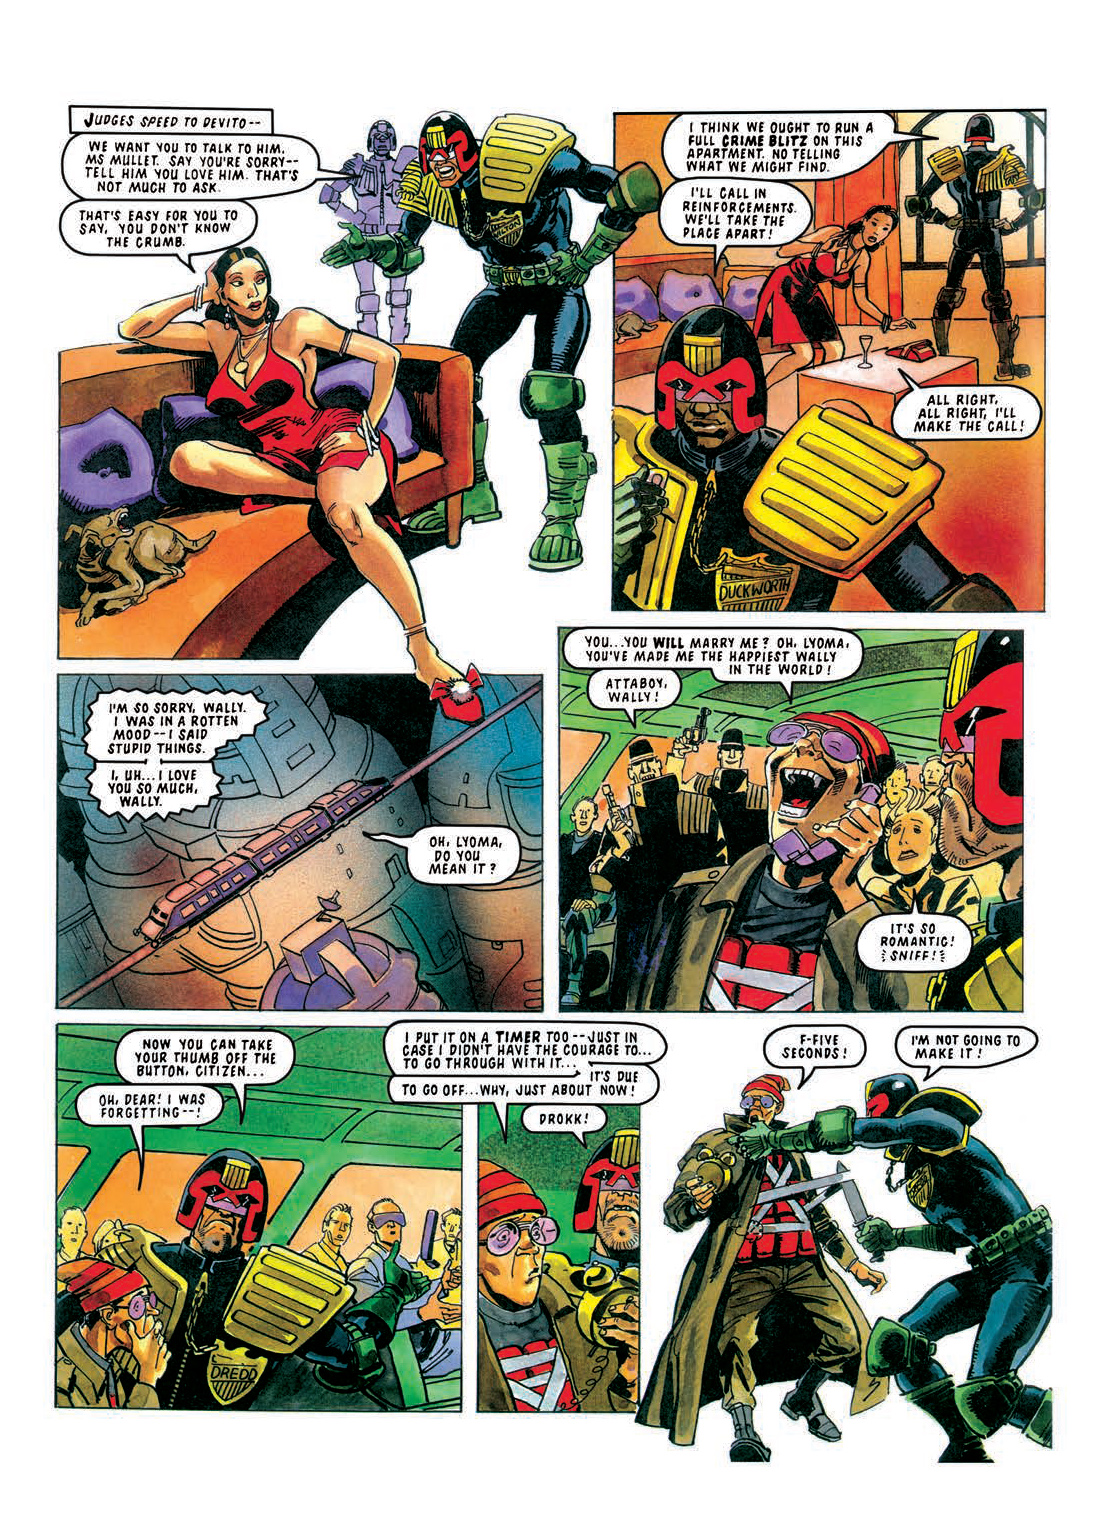 Read online Judge Dredd: The Restricted Files comic -  Issue # TPB 4 - 42